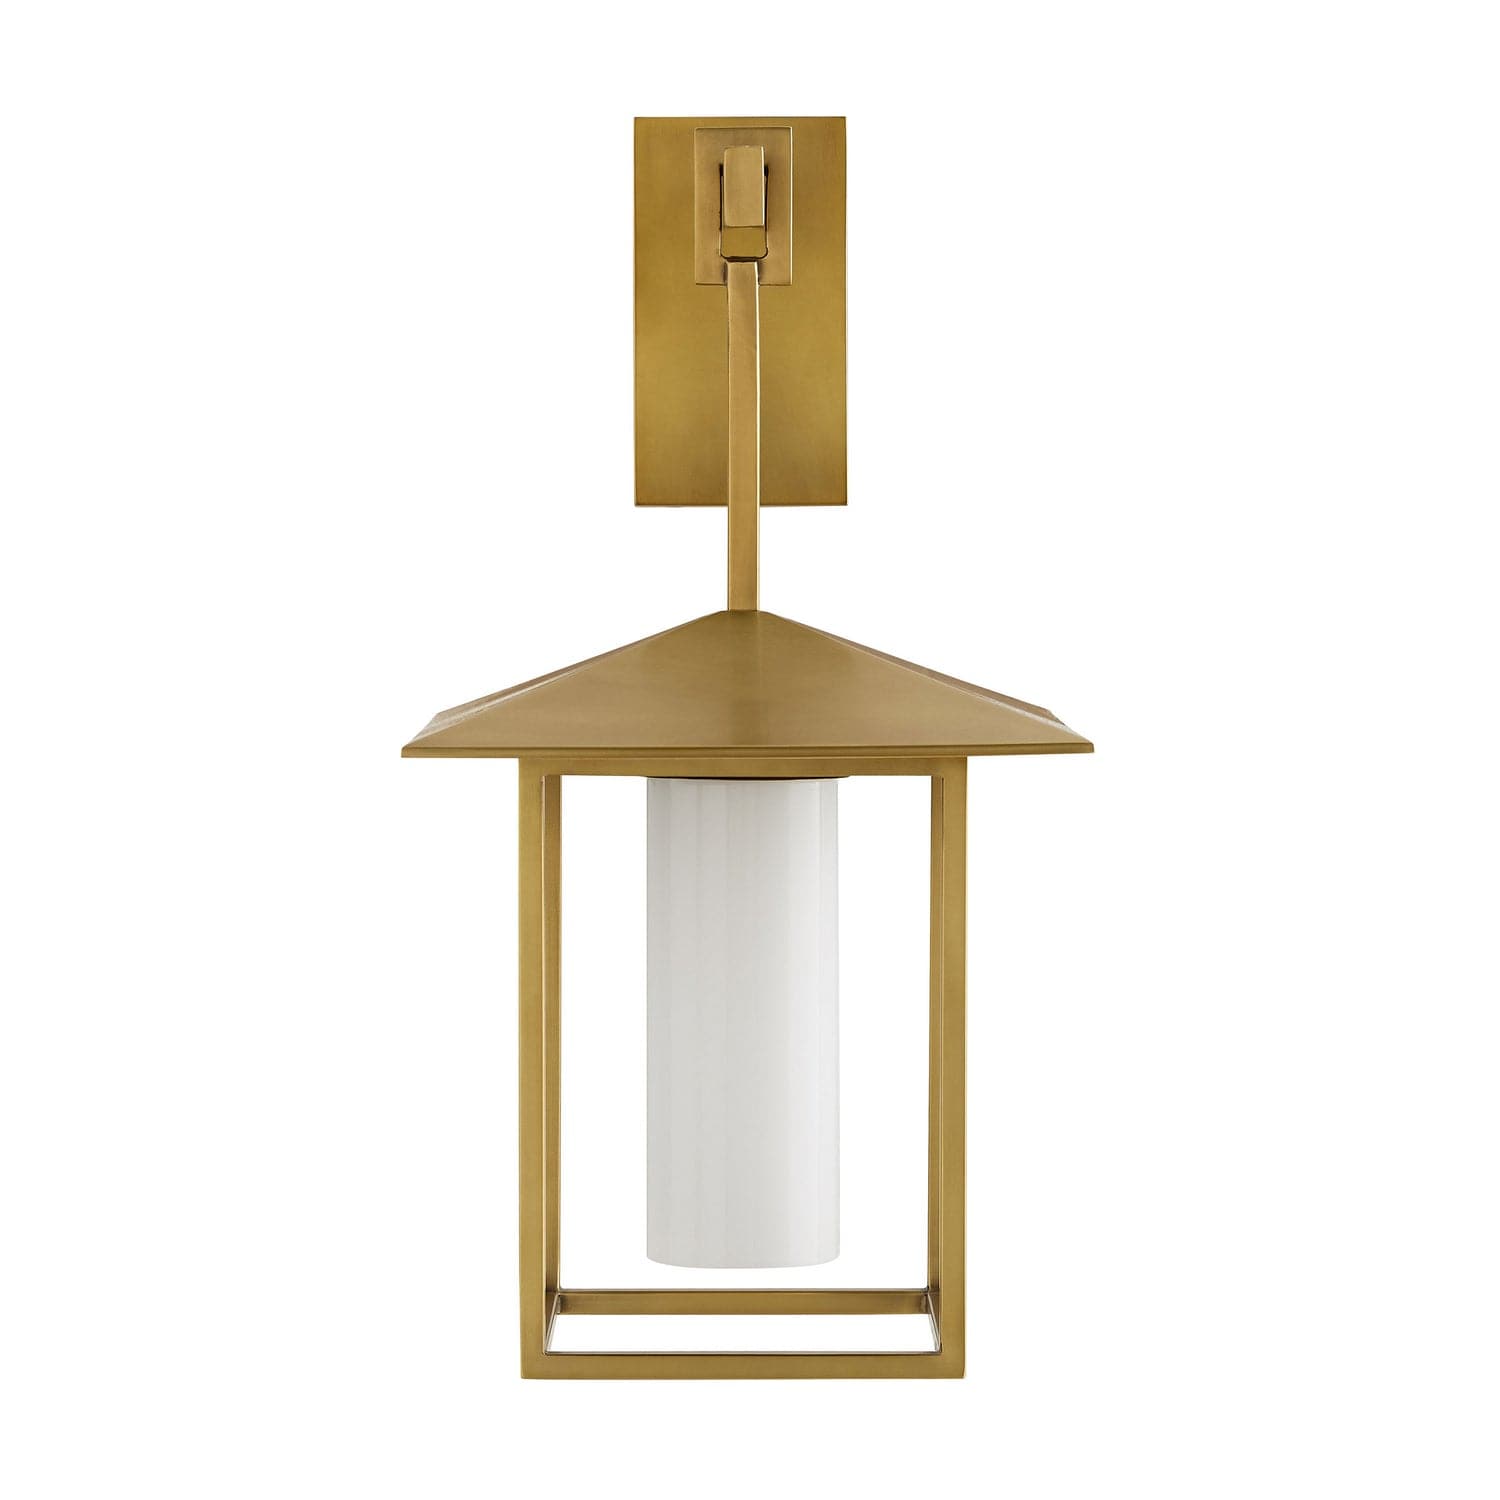 Arteriors - DB49011 - One Light Wall Sconce - Ray Booth for Arteriors - Antique Brass